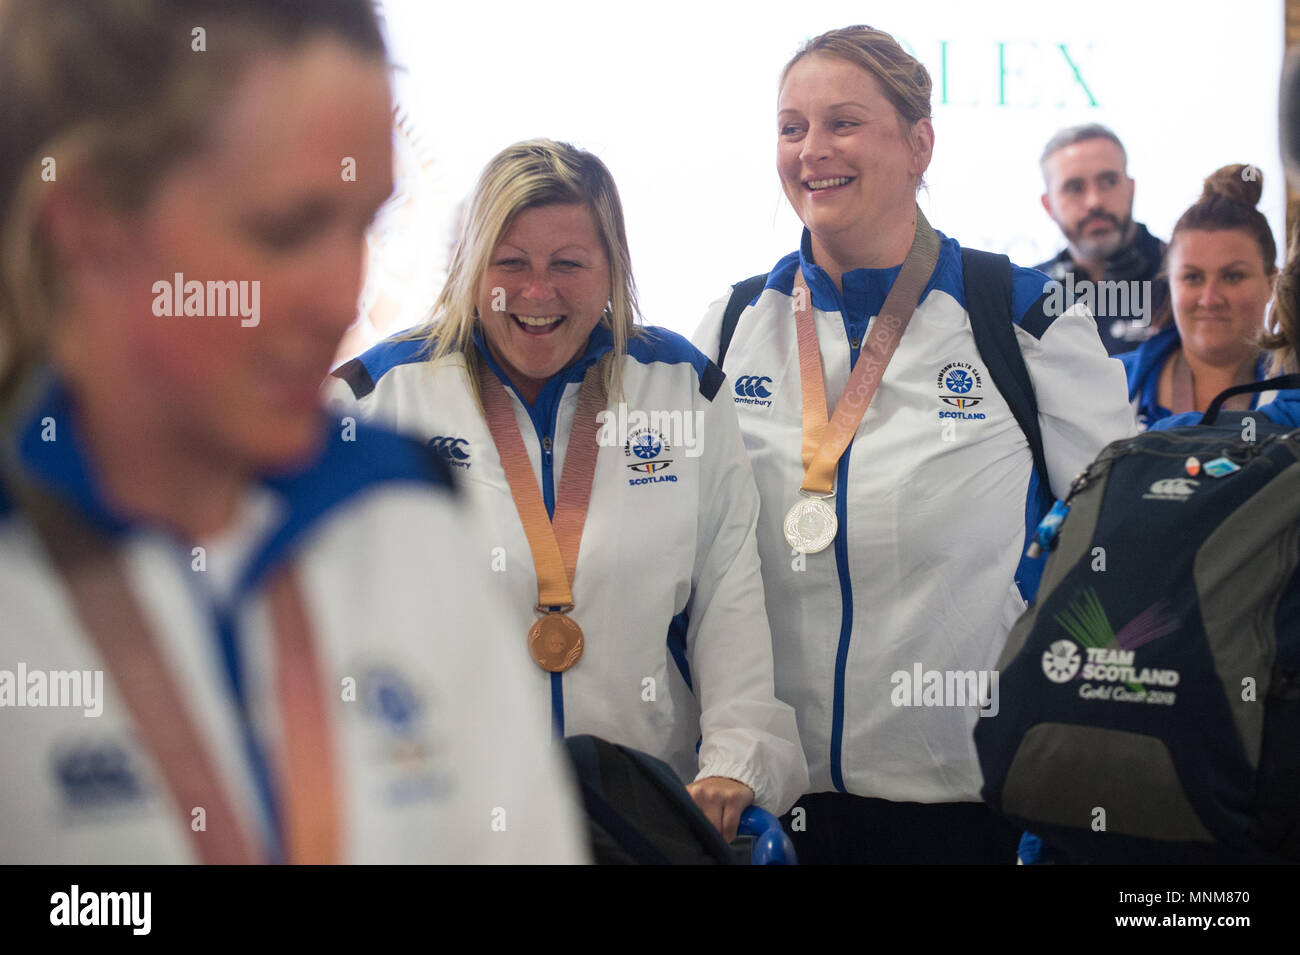 Team Scotland arrive at Glasgow airport after competing in the Gold Coast Commonwealth Games which they achieved 44 medals.  Featuring: Scottish Athletes Where: Glasgow, United Kingdom When: 17 Apr 2018 Credit: Euan Cherry/WENN Stock Photo